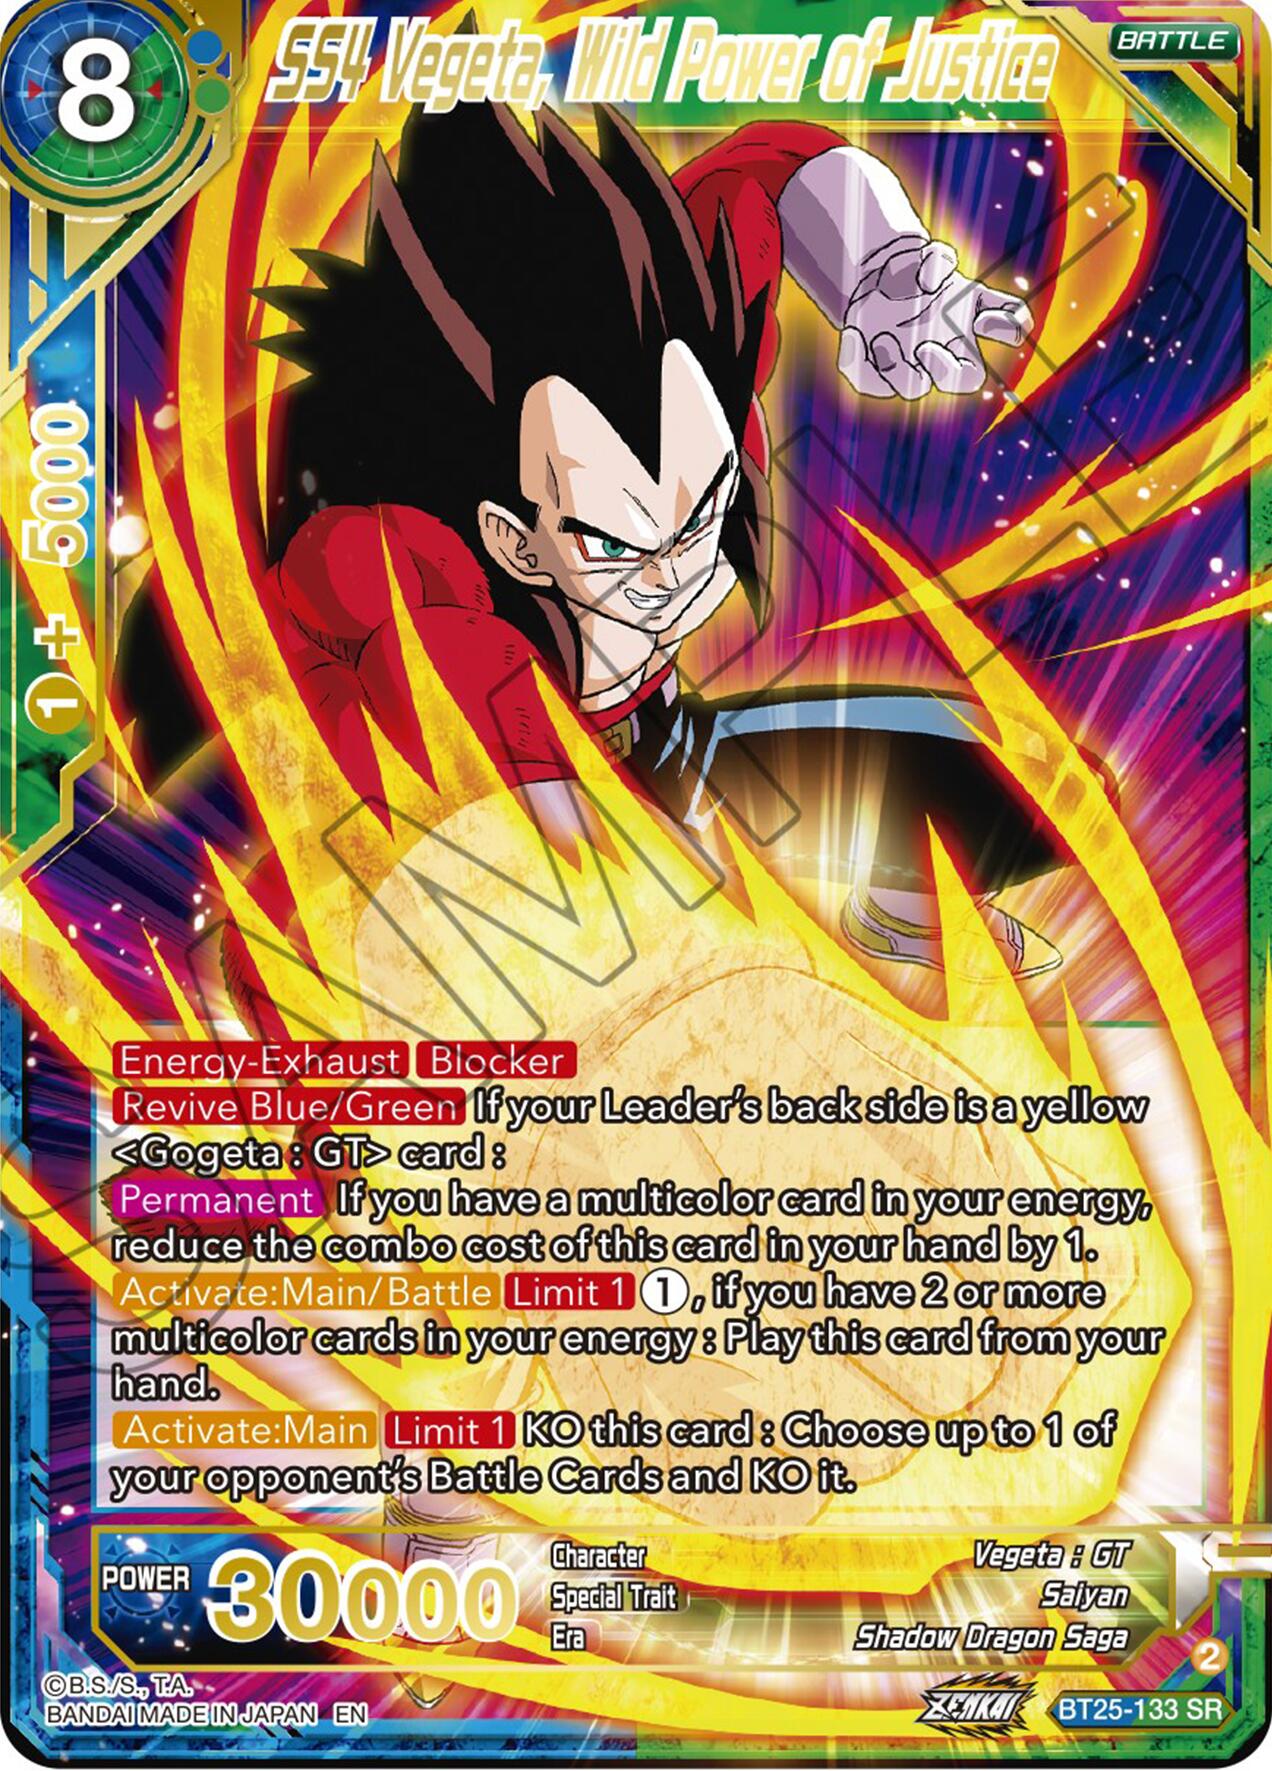 SS4 Vegeta, Wild Power of Justice (BT25-133) [Legend of the Dragon Balls] | The Time Vault CA